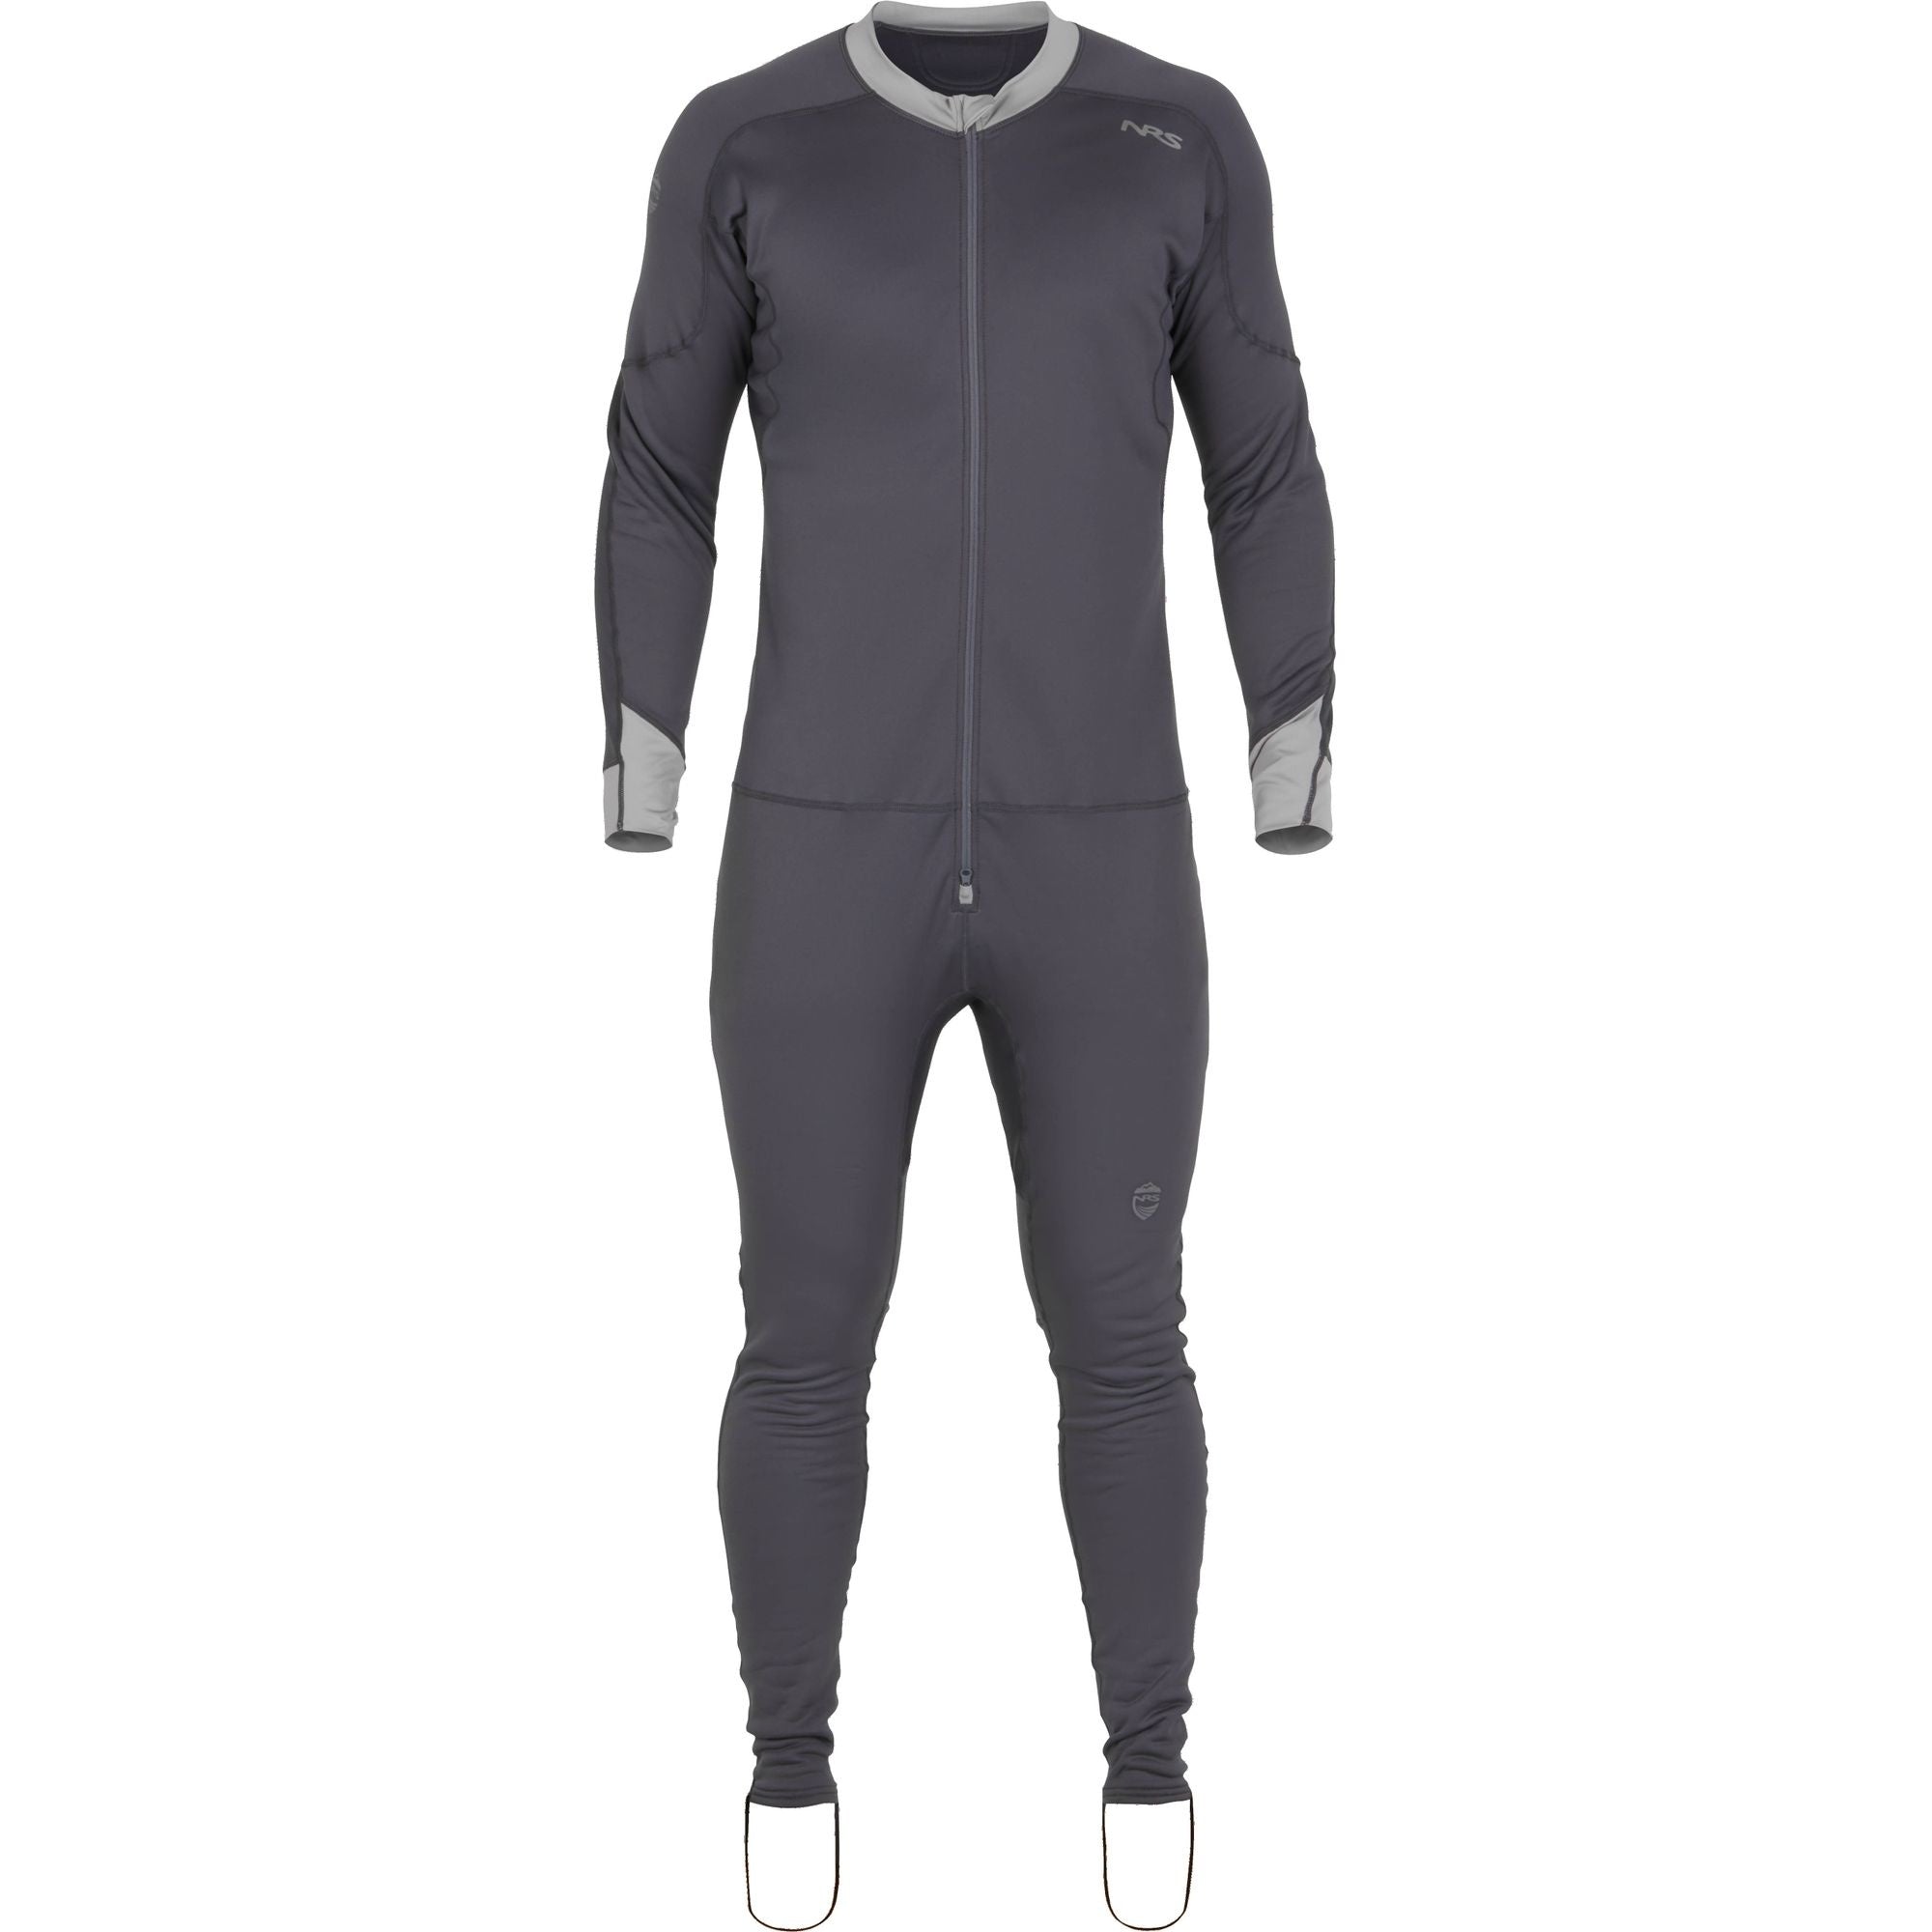 NRS - Mens Expedition Weight Union Suit